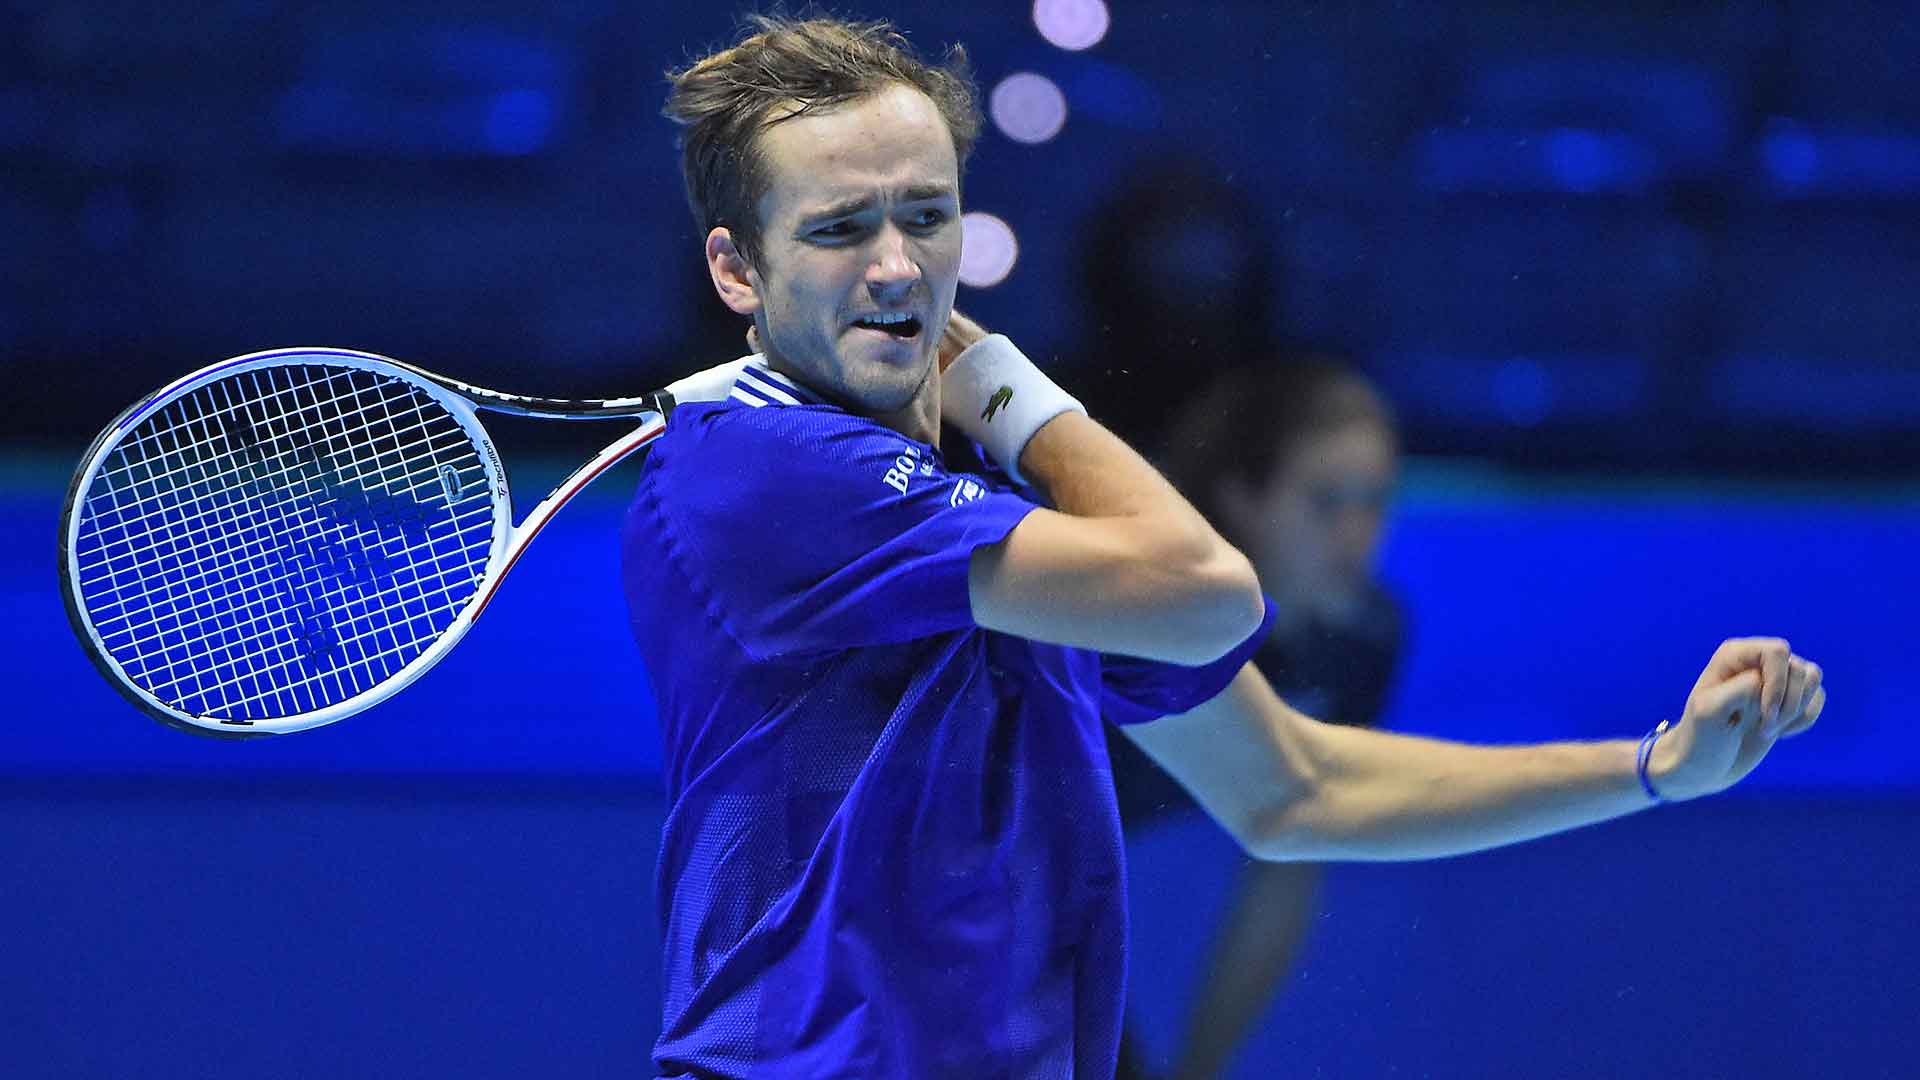 With Fast Conditions, Medvedev Says Theres No Clear Favourite ATP Tour Tennis